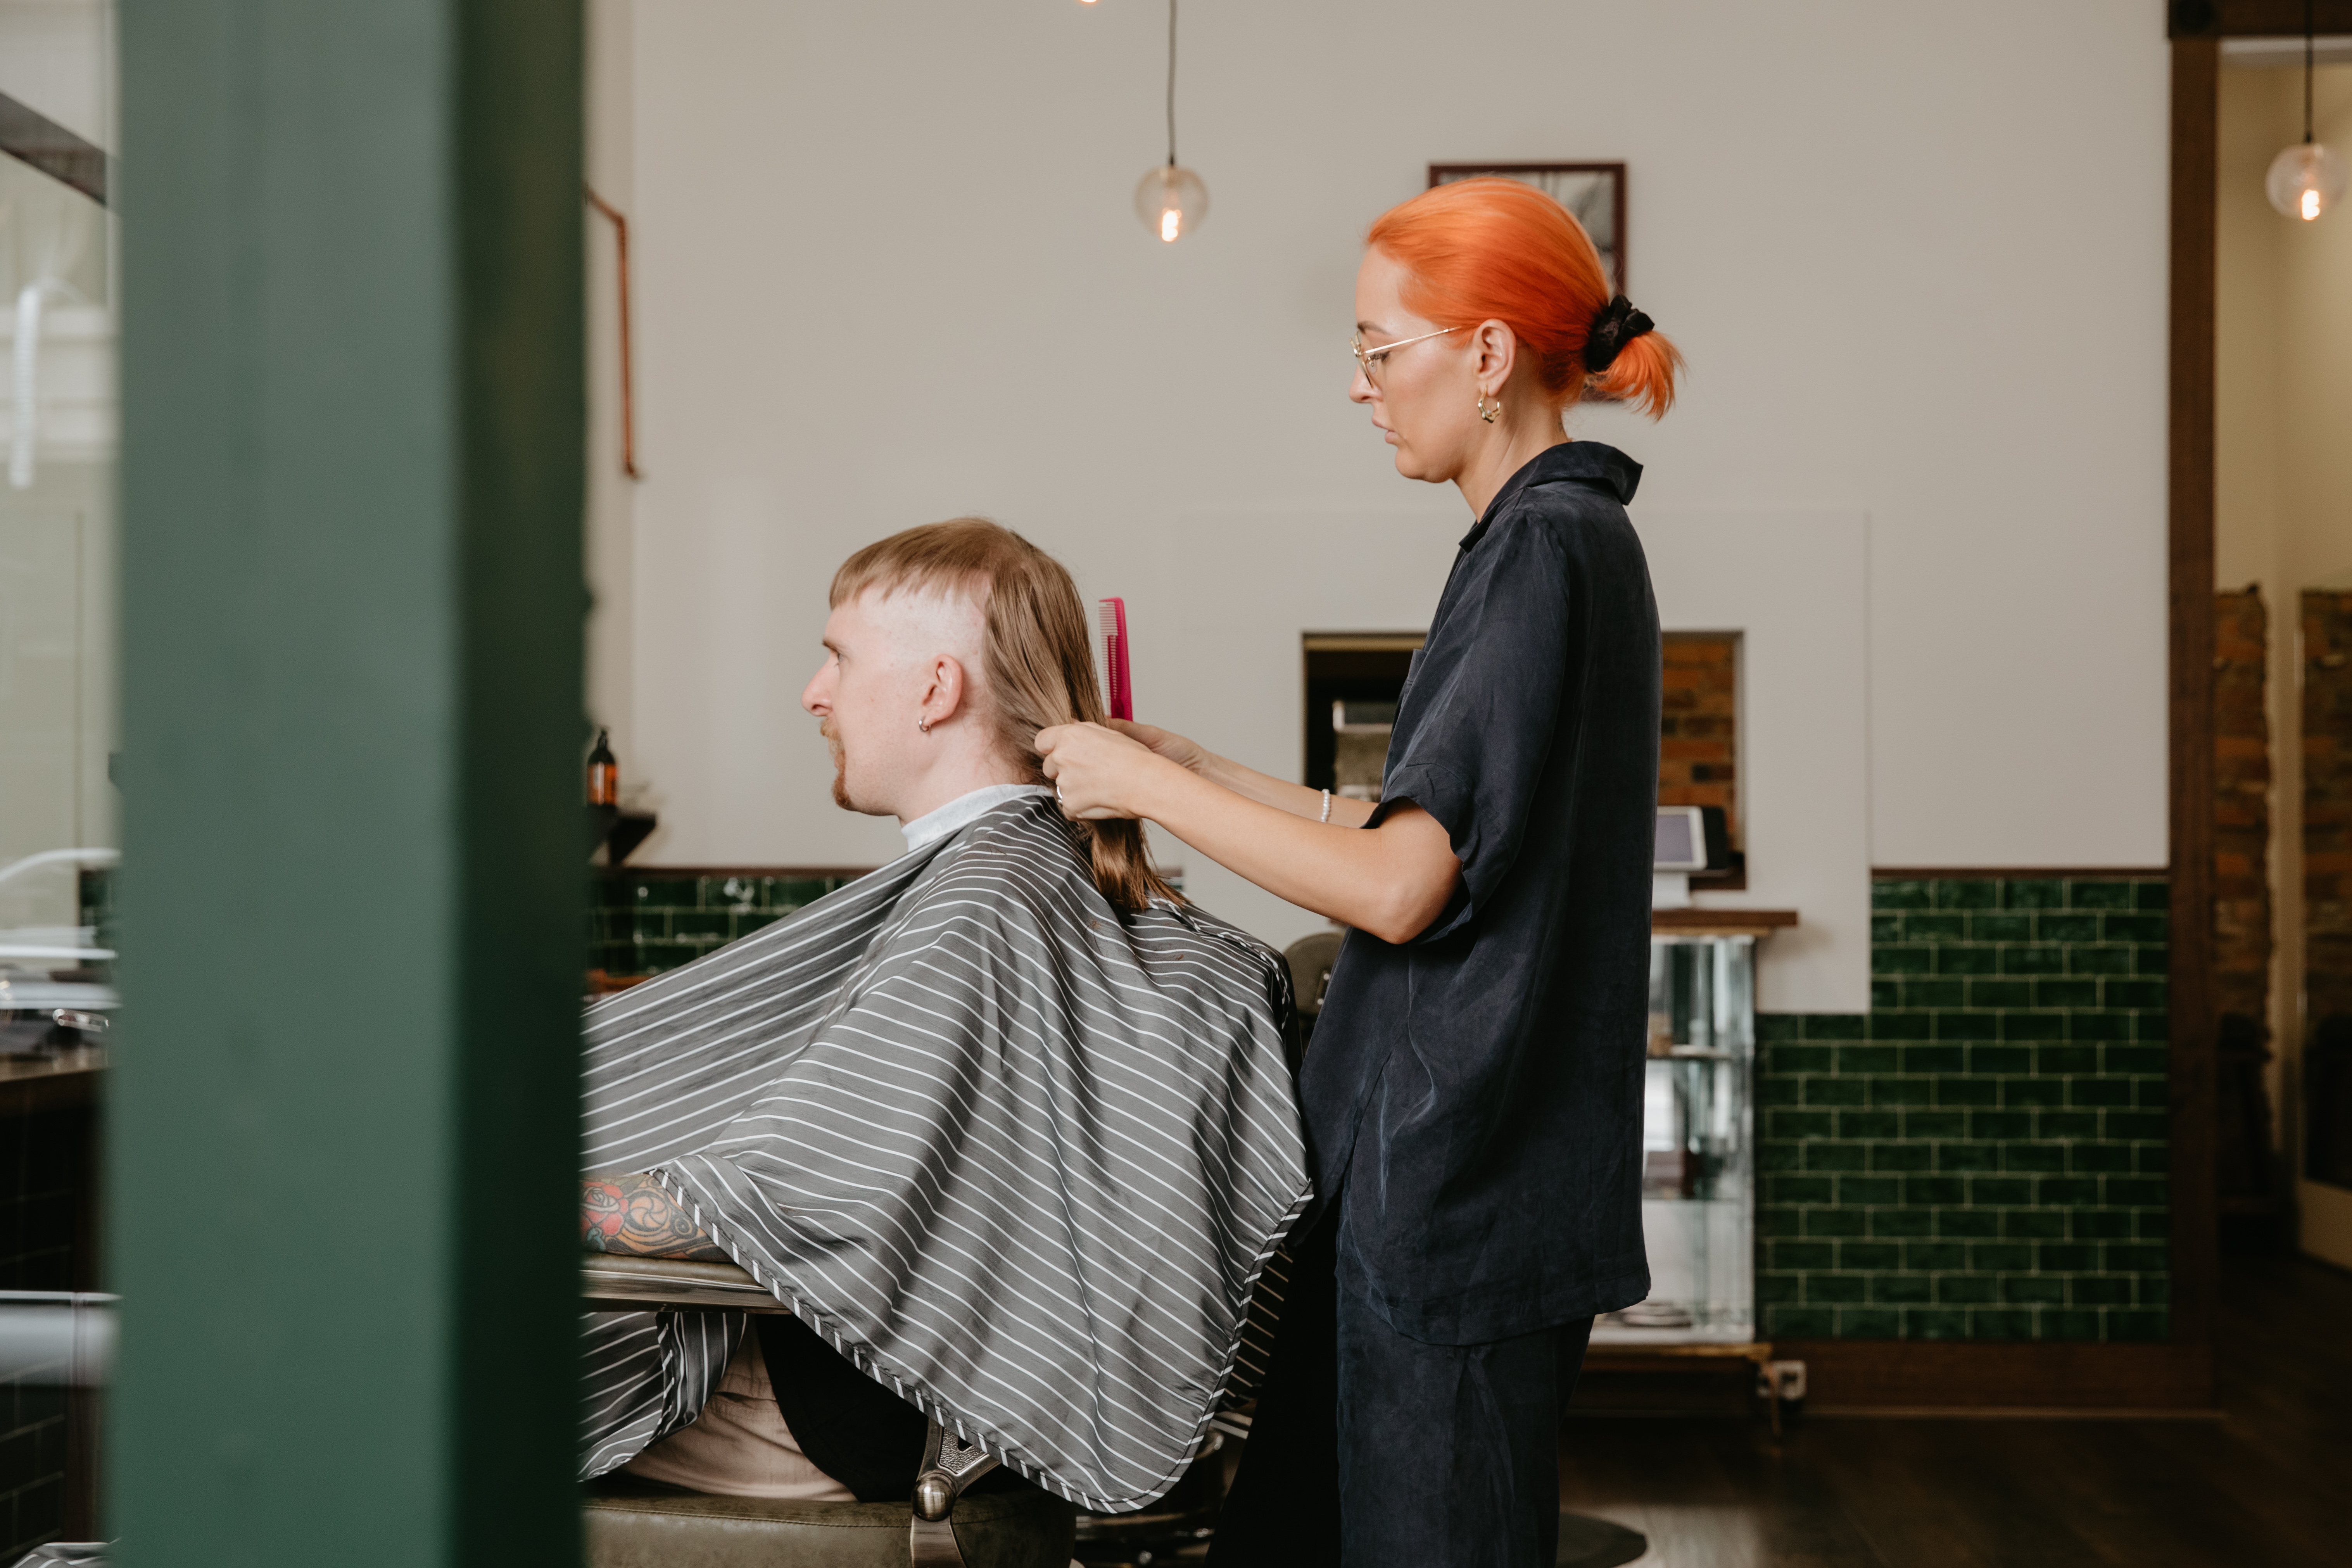 Opening a barbershop: The complete step-by-step guide